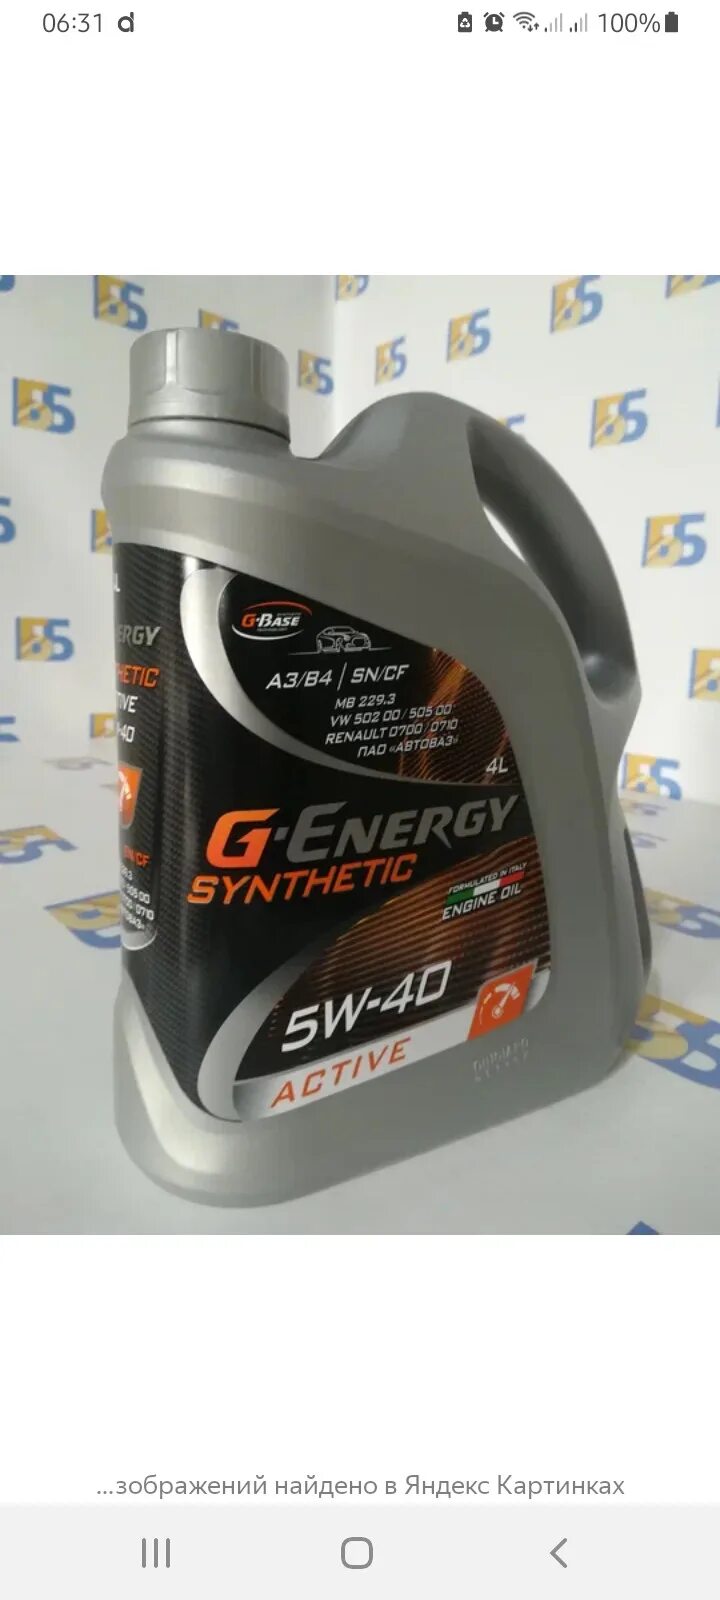 G Energy Synthetic 5w40. G-Energy Synthetic Active 5w-40. G-Energy Synthetic Active 5w40 4л. G Energy 5w40 синтетика Active.